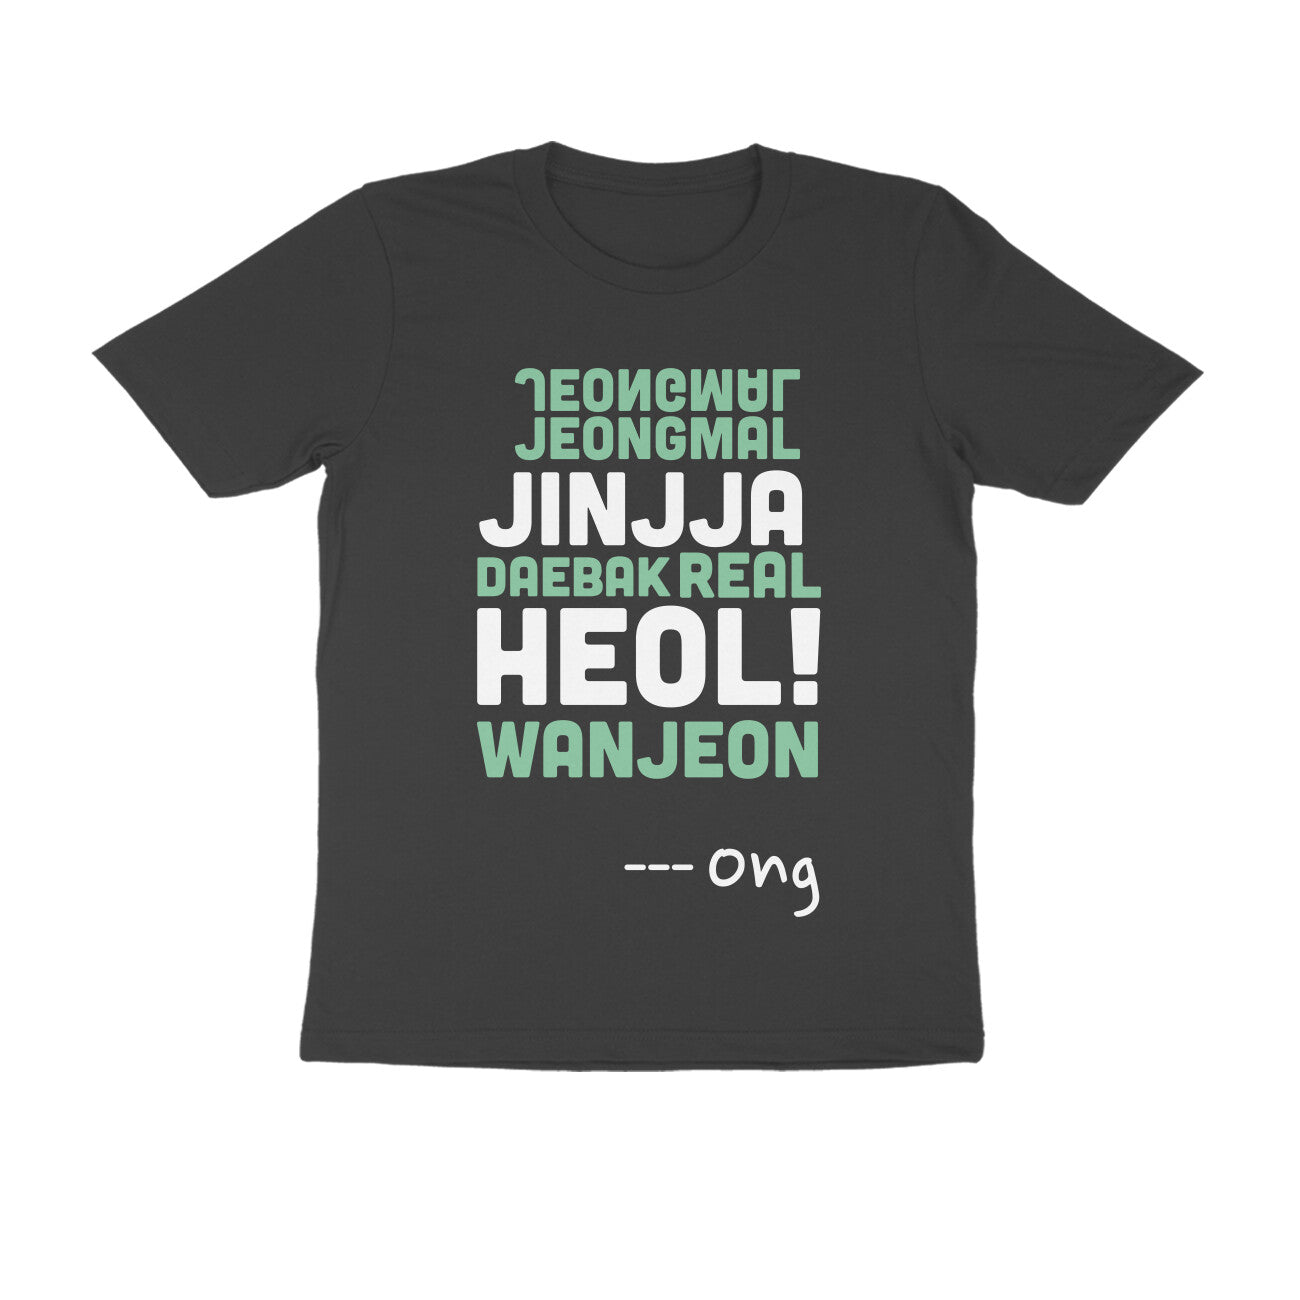 Ong's Quote - Tee